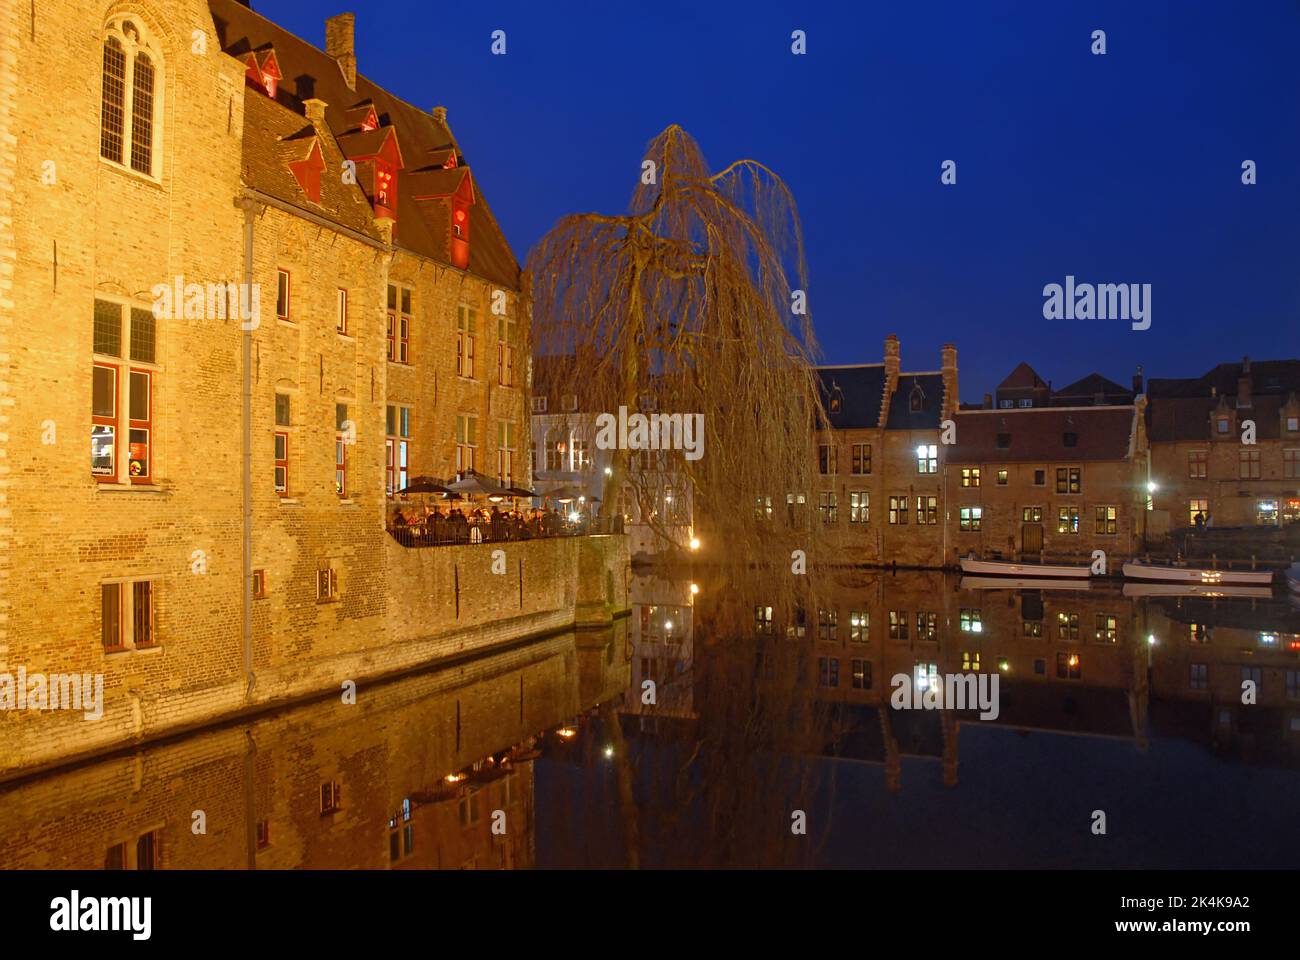 Brugge or Bruges, West Flanders, Belgium: Traditional buildings along the Dijver Canal in Brugge at night with outdoor restaurant. Stock Photo